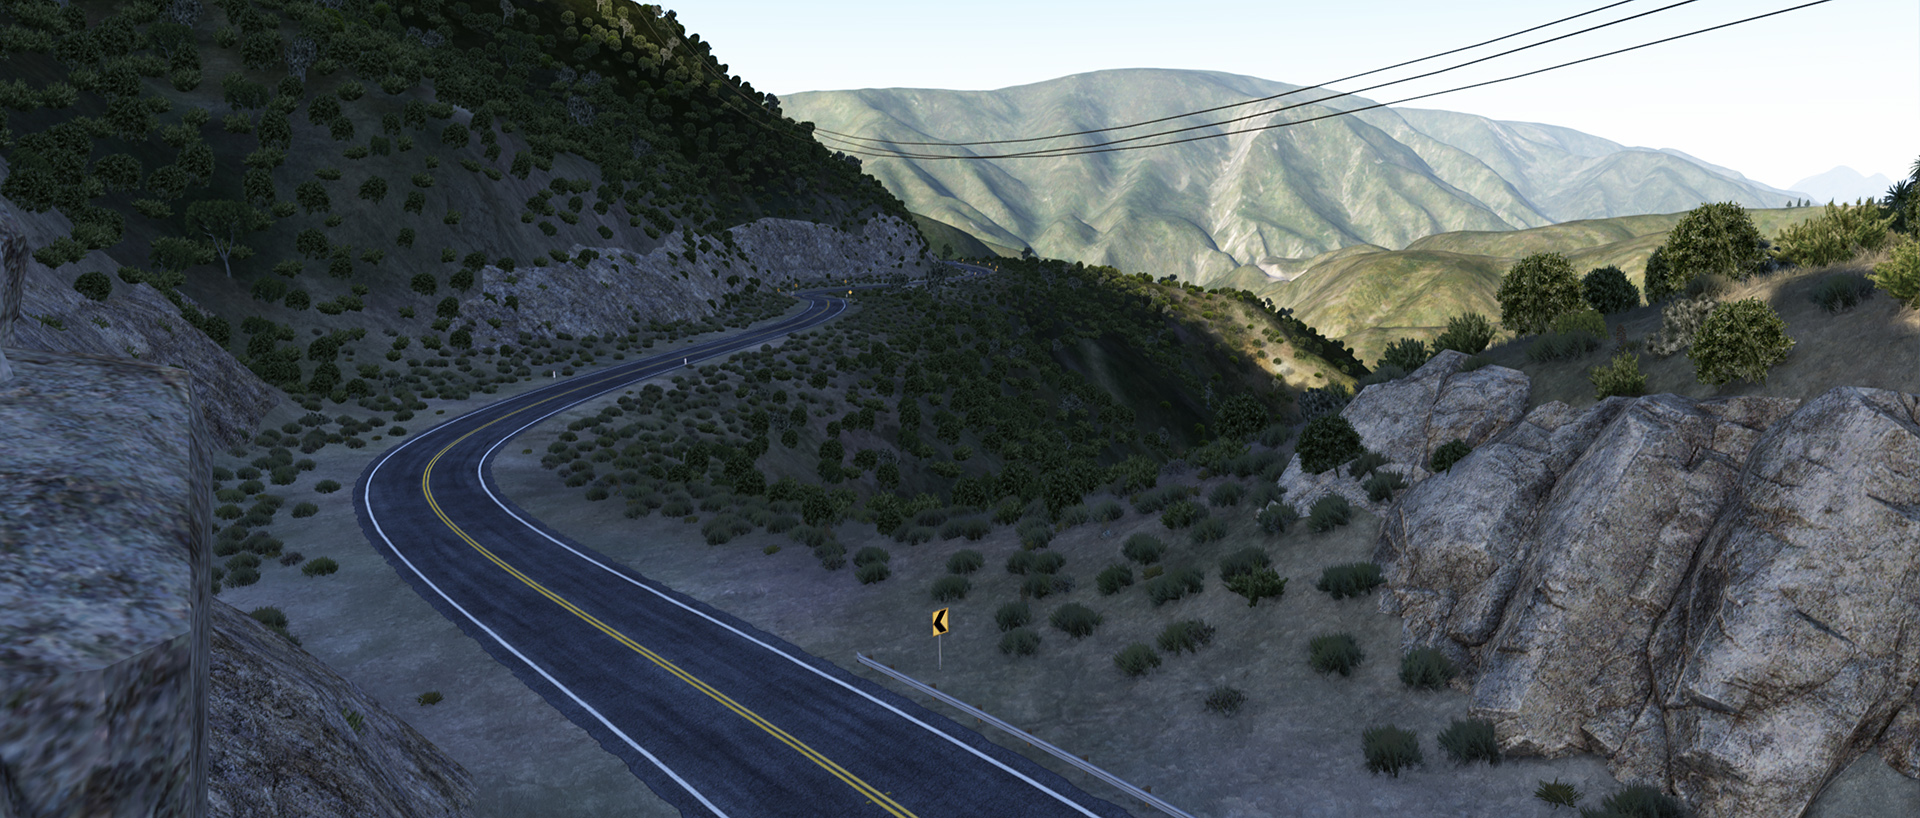 la_canyon_angeles_forest_update.jpg